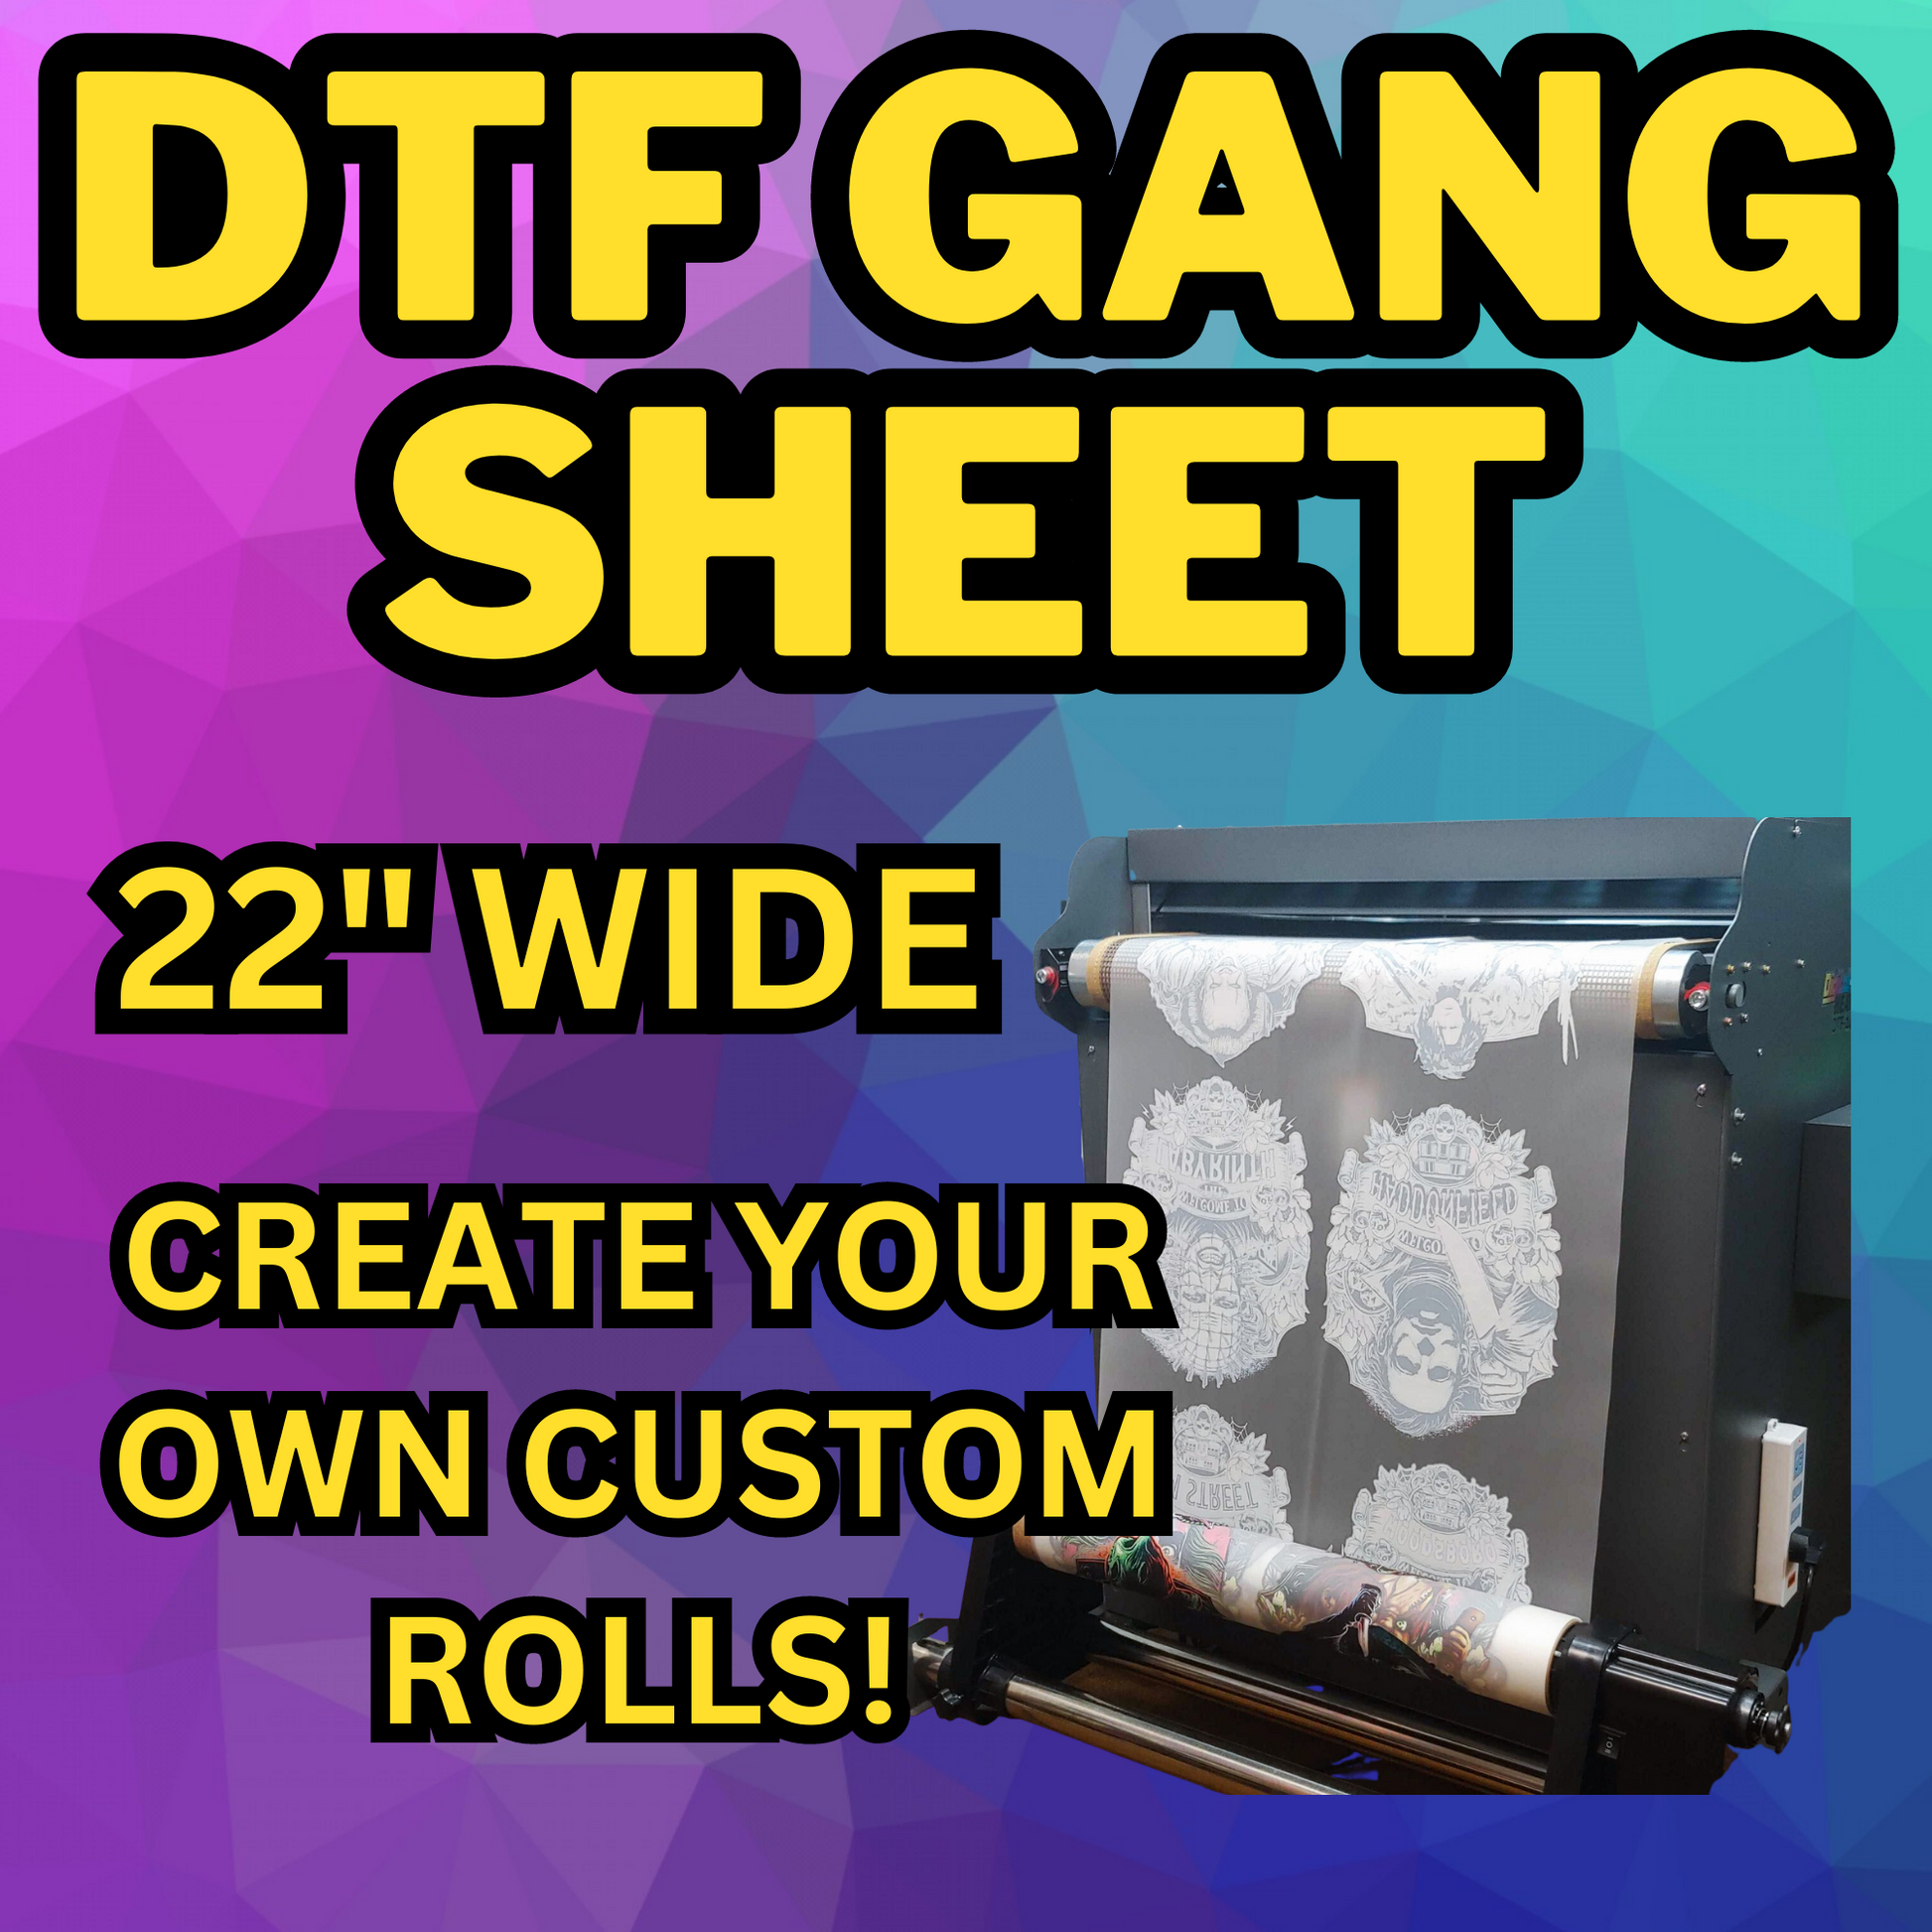 Christmas Collection DTF Gang Sheet, DTF Transfers, Ready To Press 22 X  60